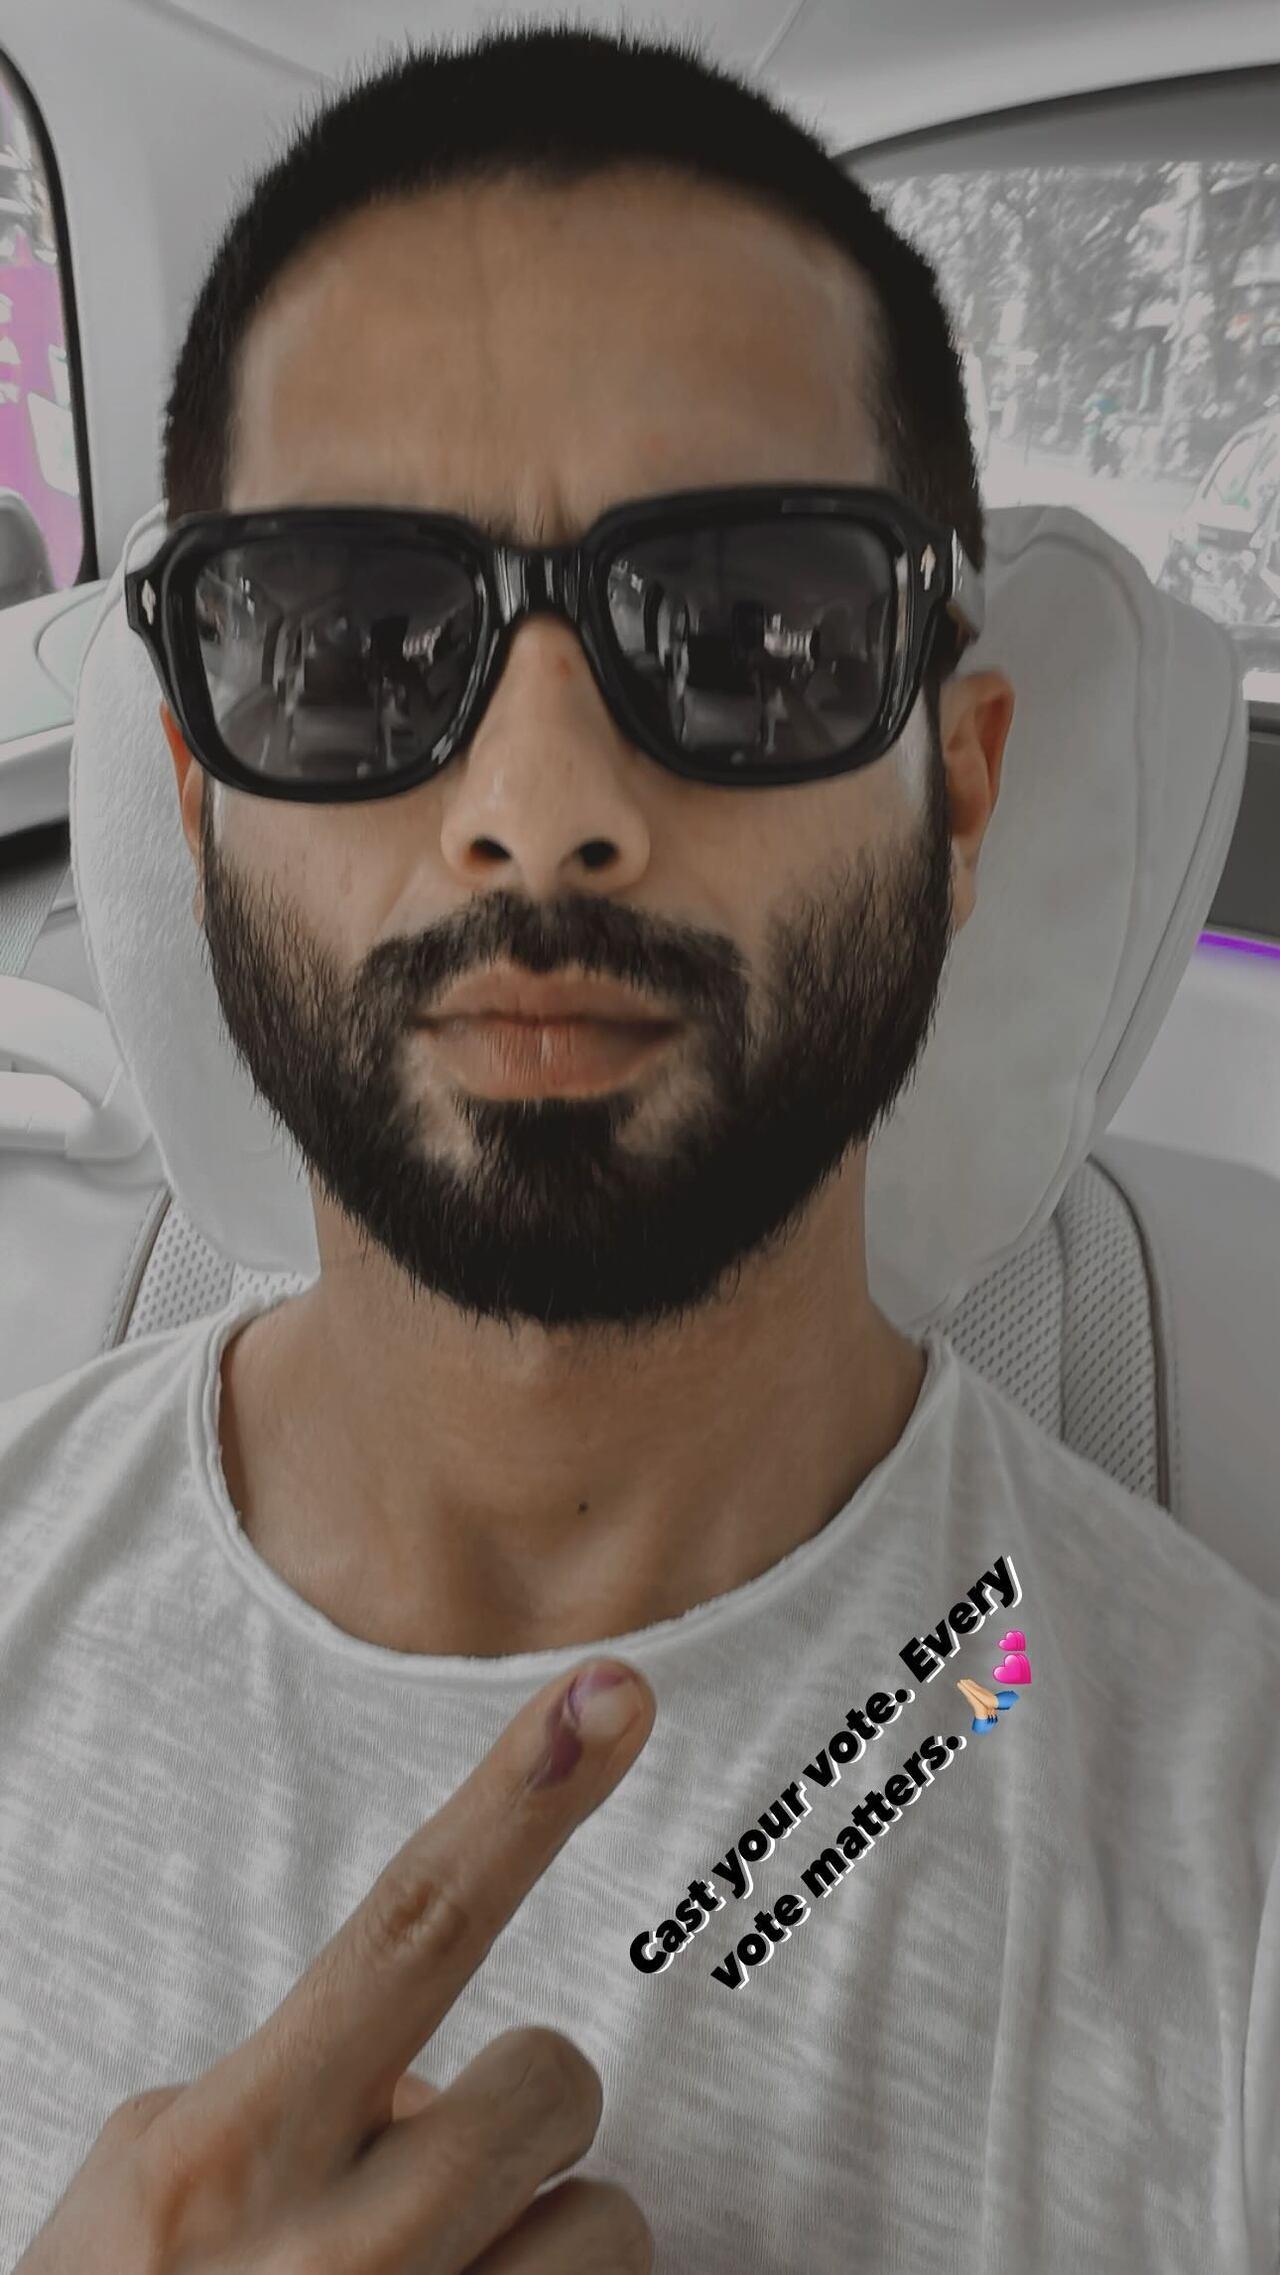 Shahid Kapoor took to Instagram stories to share a picture of his inked finger and urged his followers to vote